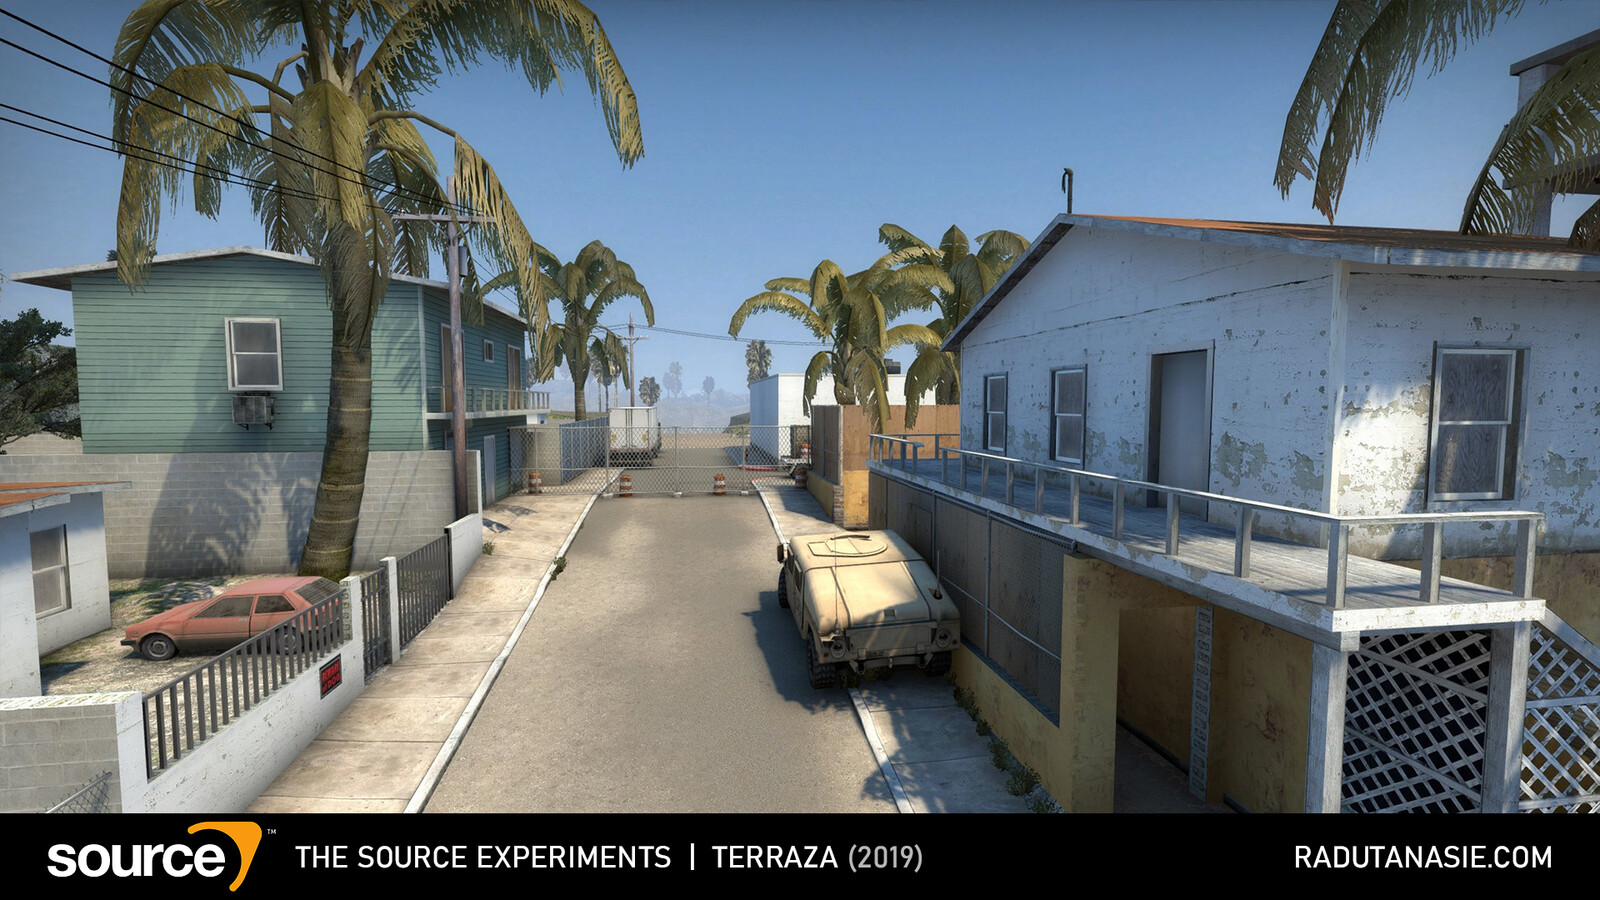 Terraza is a 2v2 bomb/defuse level designed for Counter-Strike: Global Offensive Wingman mode and is based on Baja, California. As of now, the map has been featured in 3 Mapcore FACEIT Hub Seasons and 2 Wingman Tournaments.